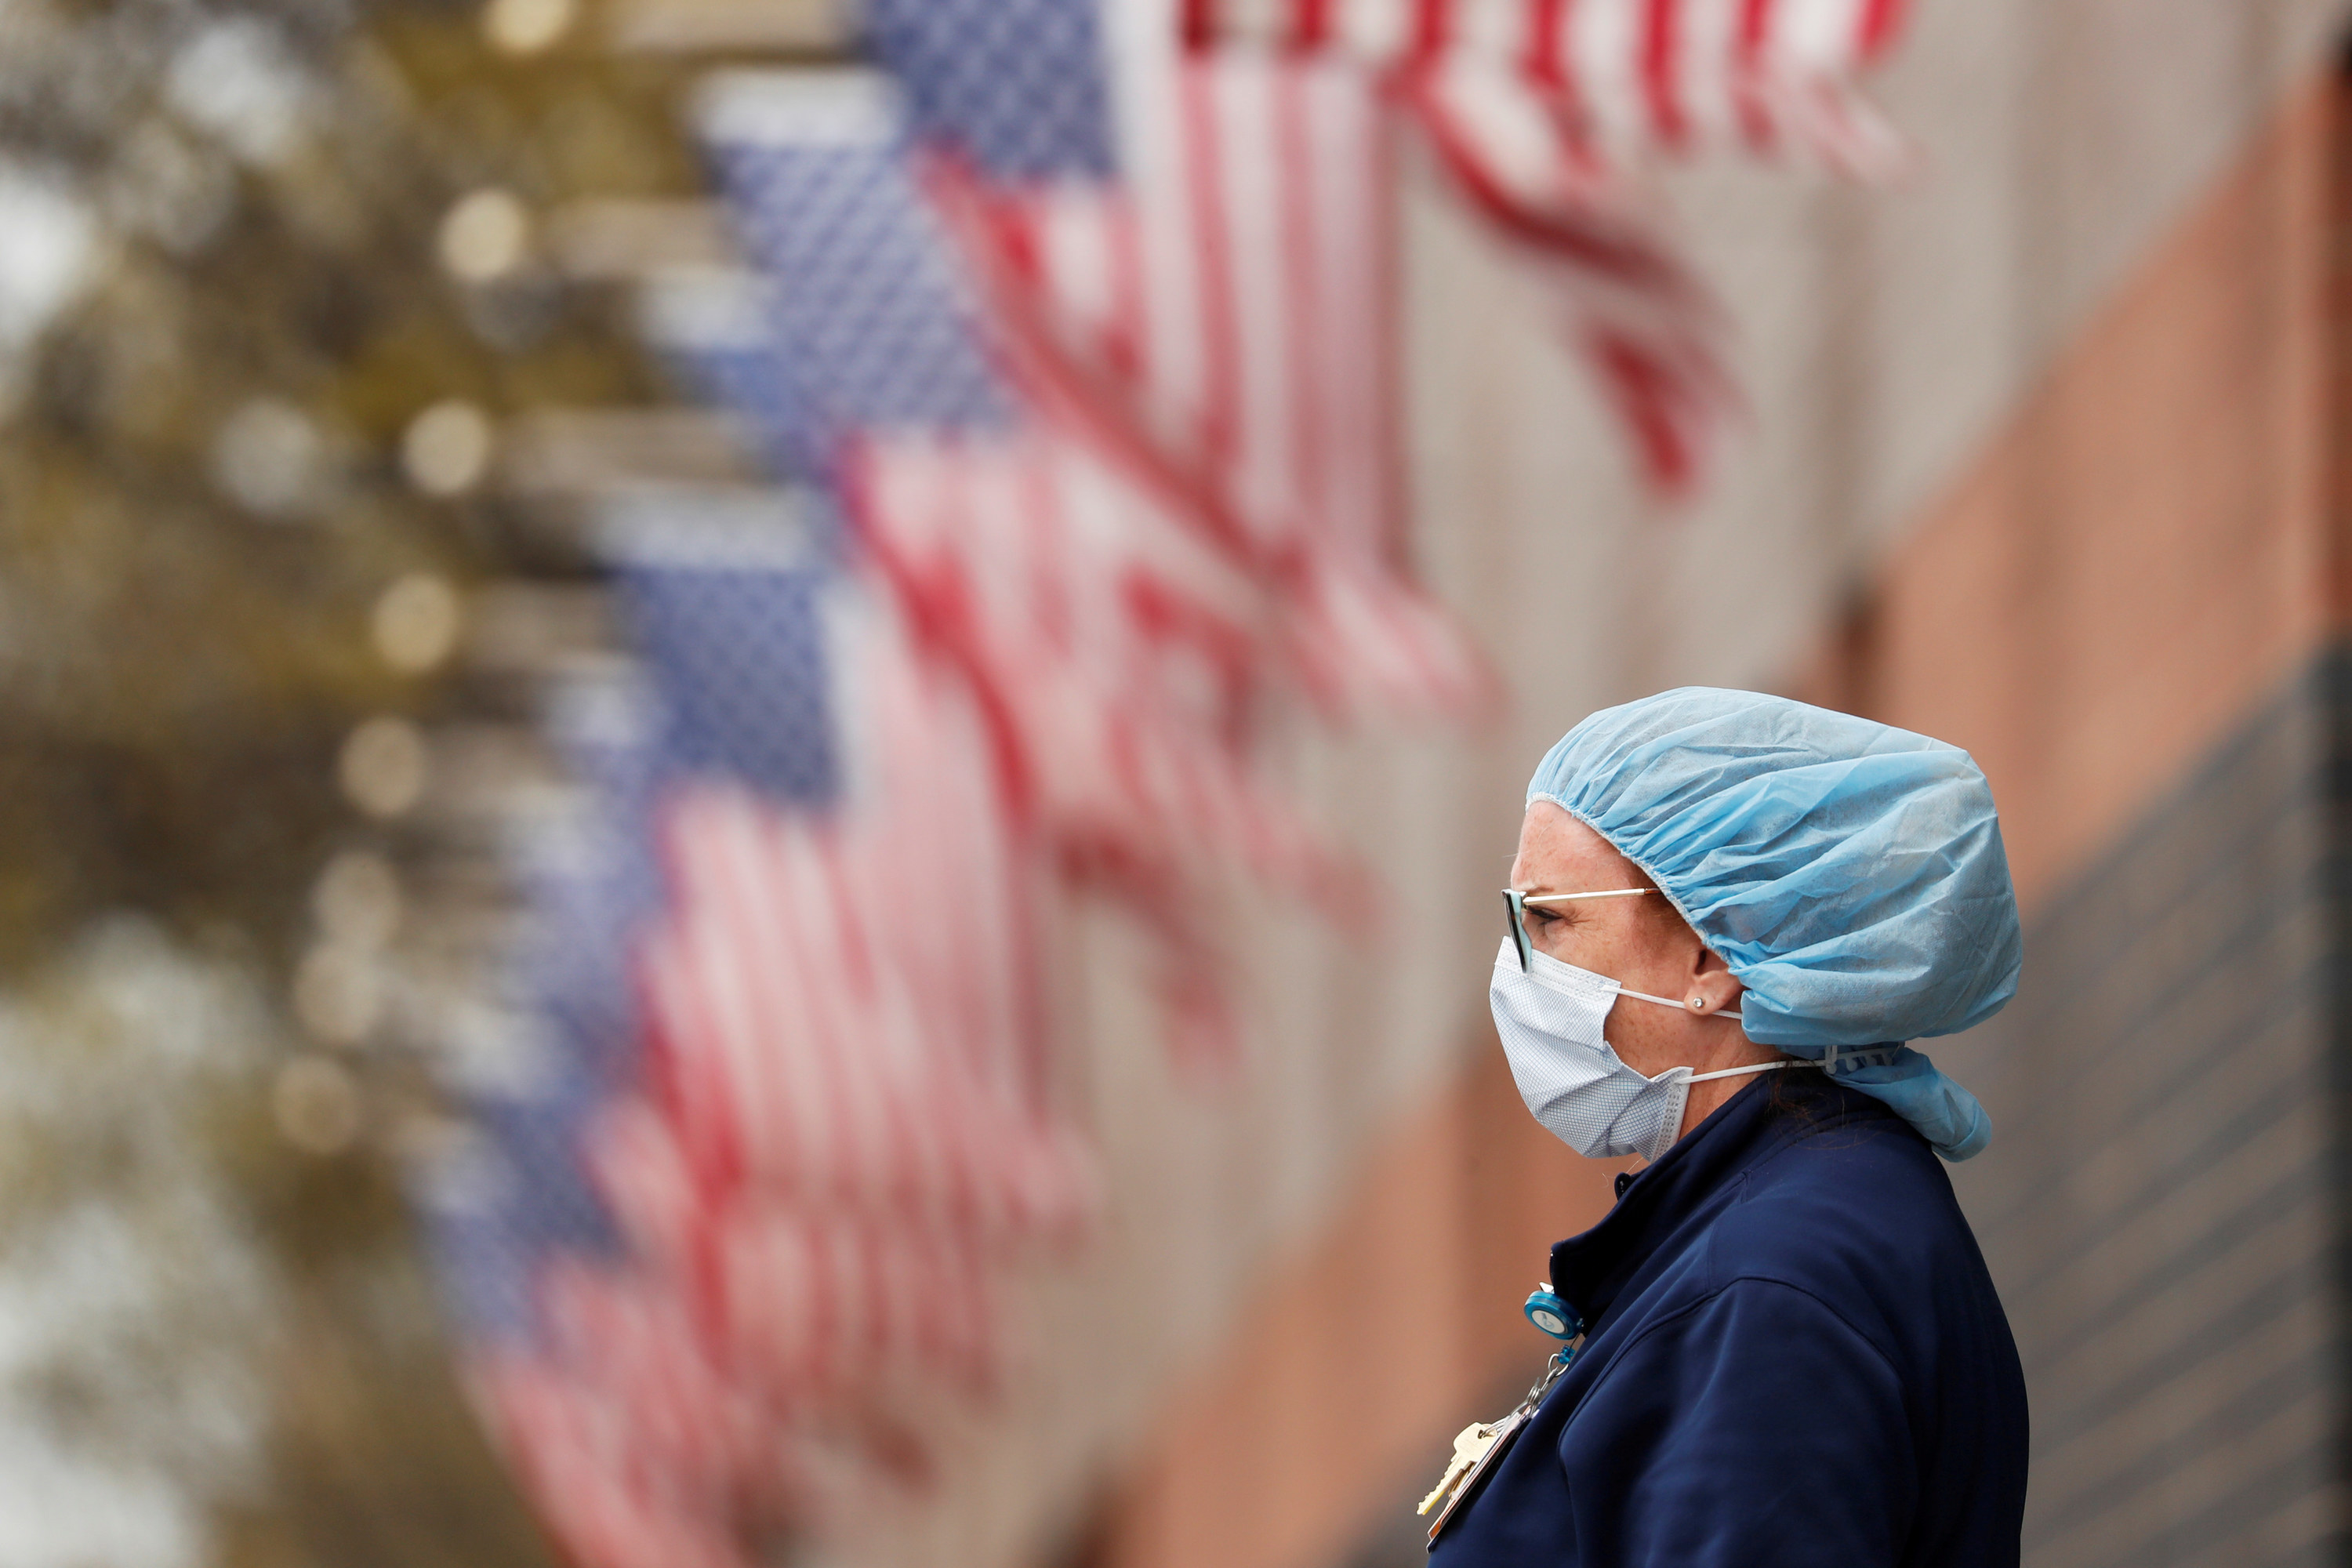 A nurse wearing PPE stands in front of American flags